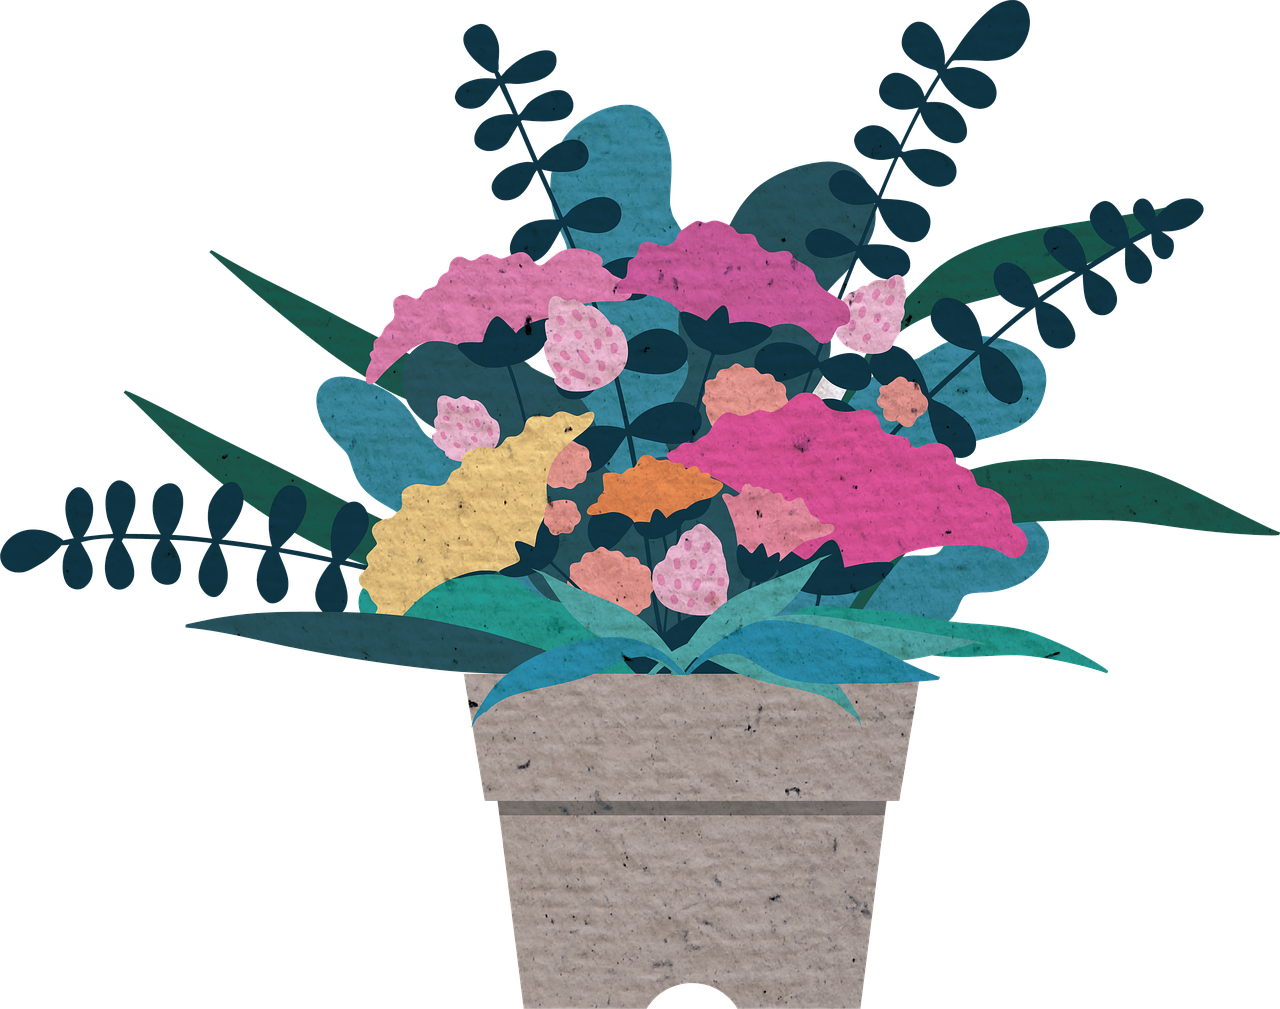 a flower pot filled with lots of colorful flowers, a digital painting, inspired by François Boquet, unsplash, conceptual art, cut-out paper collage, stylized silhouette, けもの, grainy